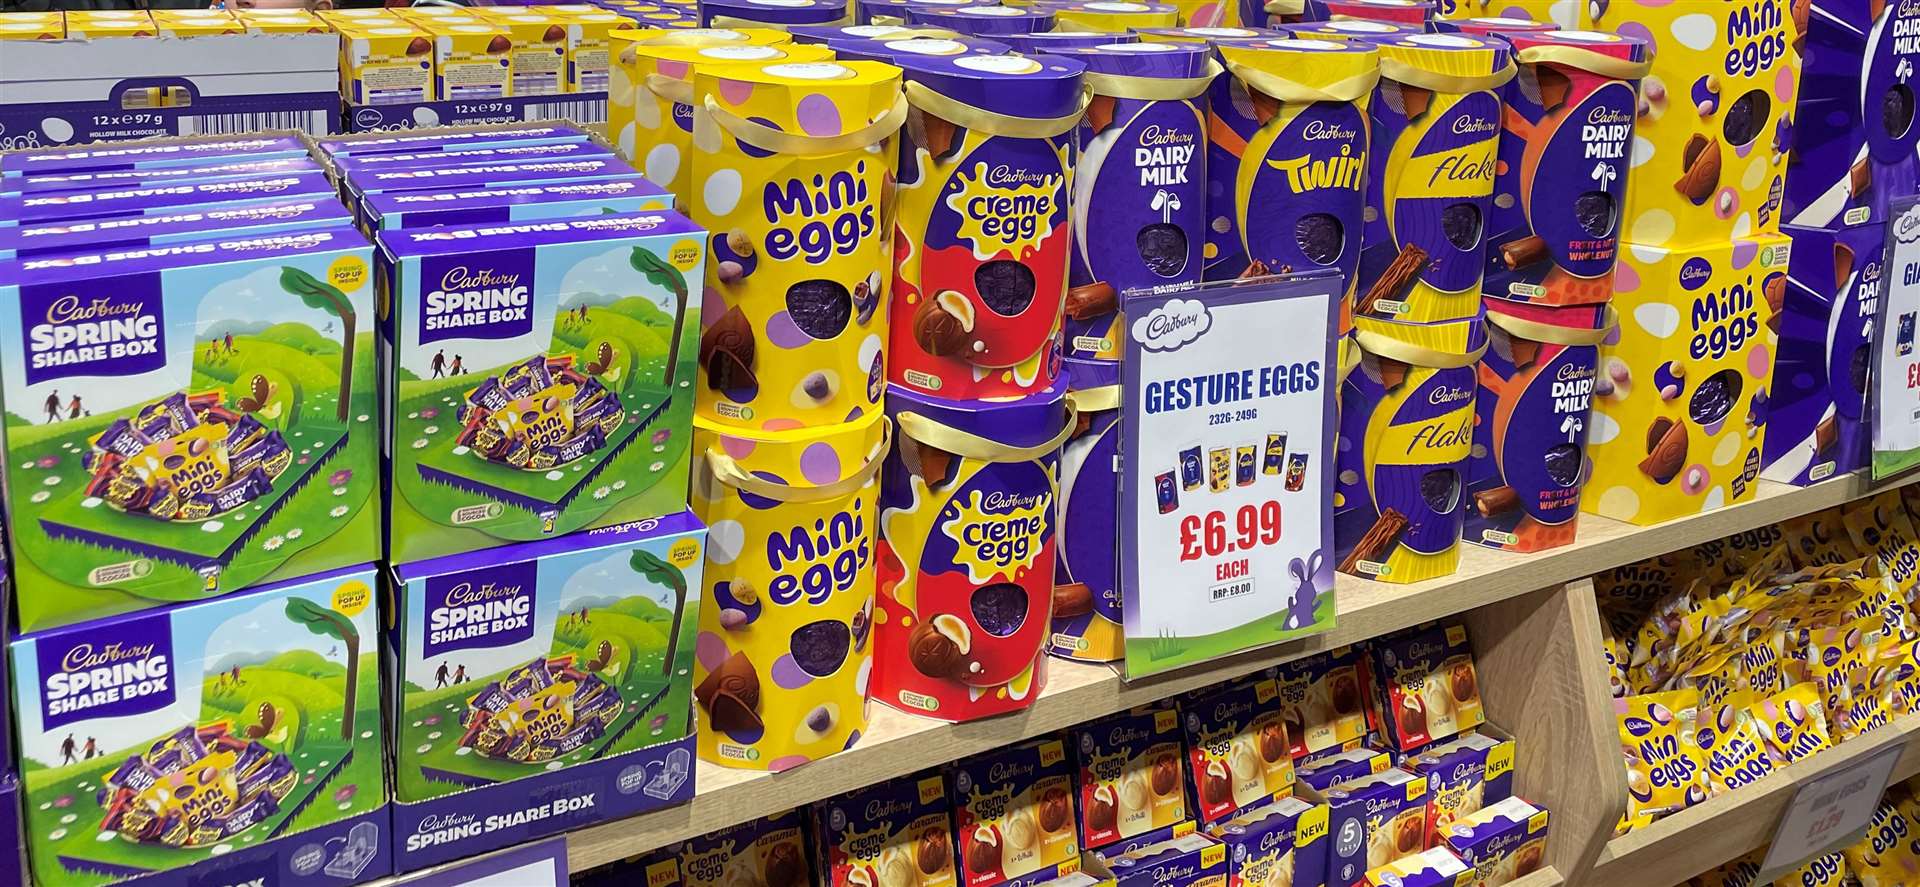 Cadbury says alternative sized chocolate buttons packets will remain on shelves